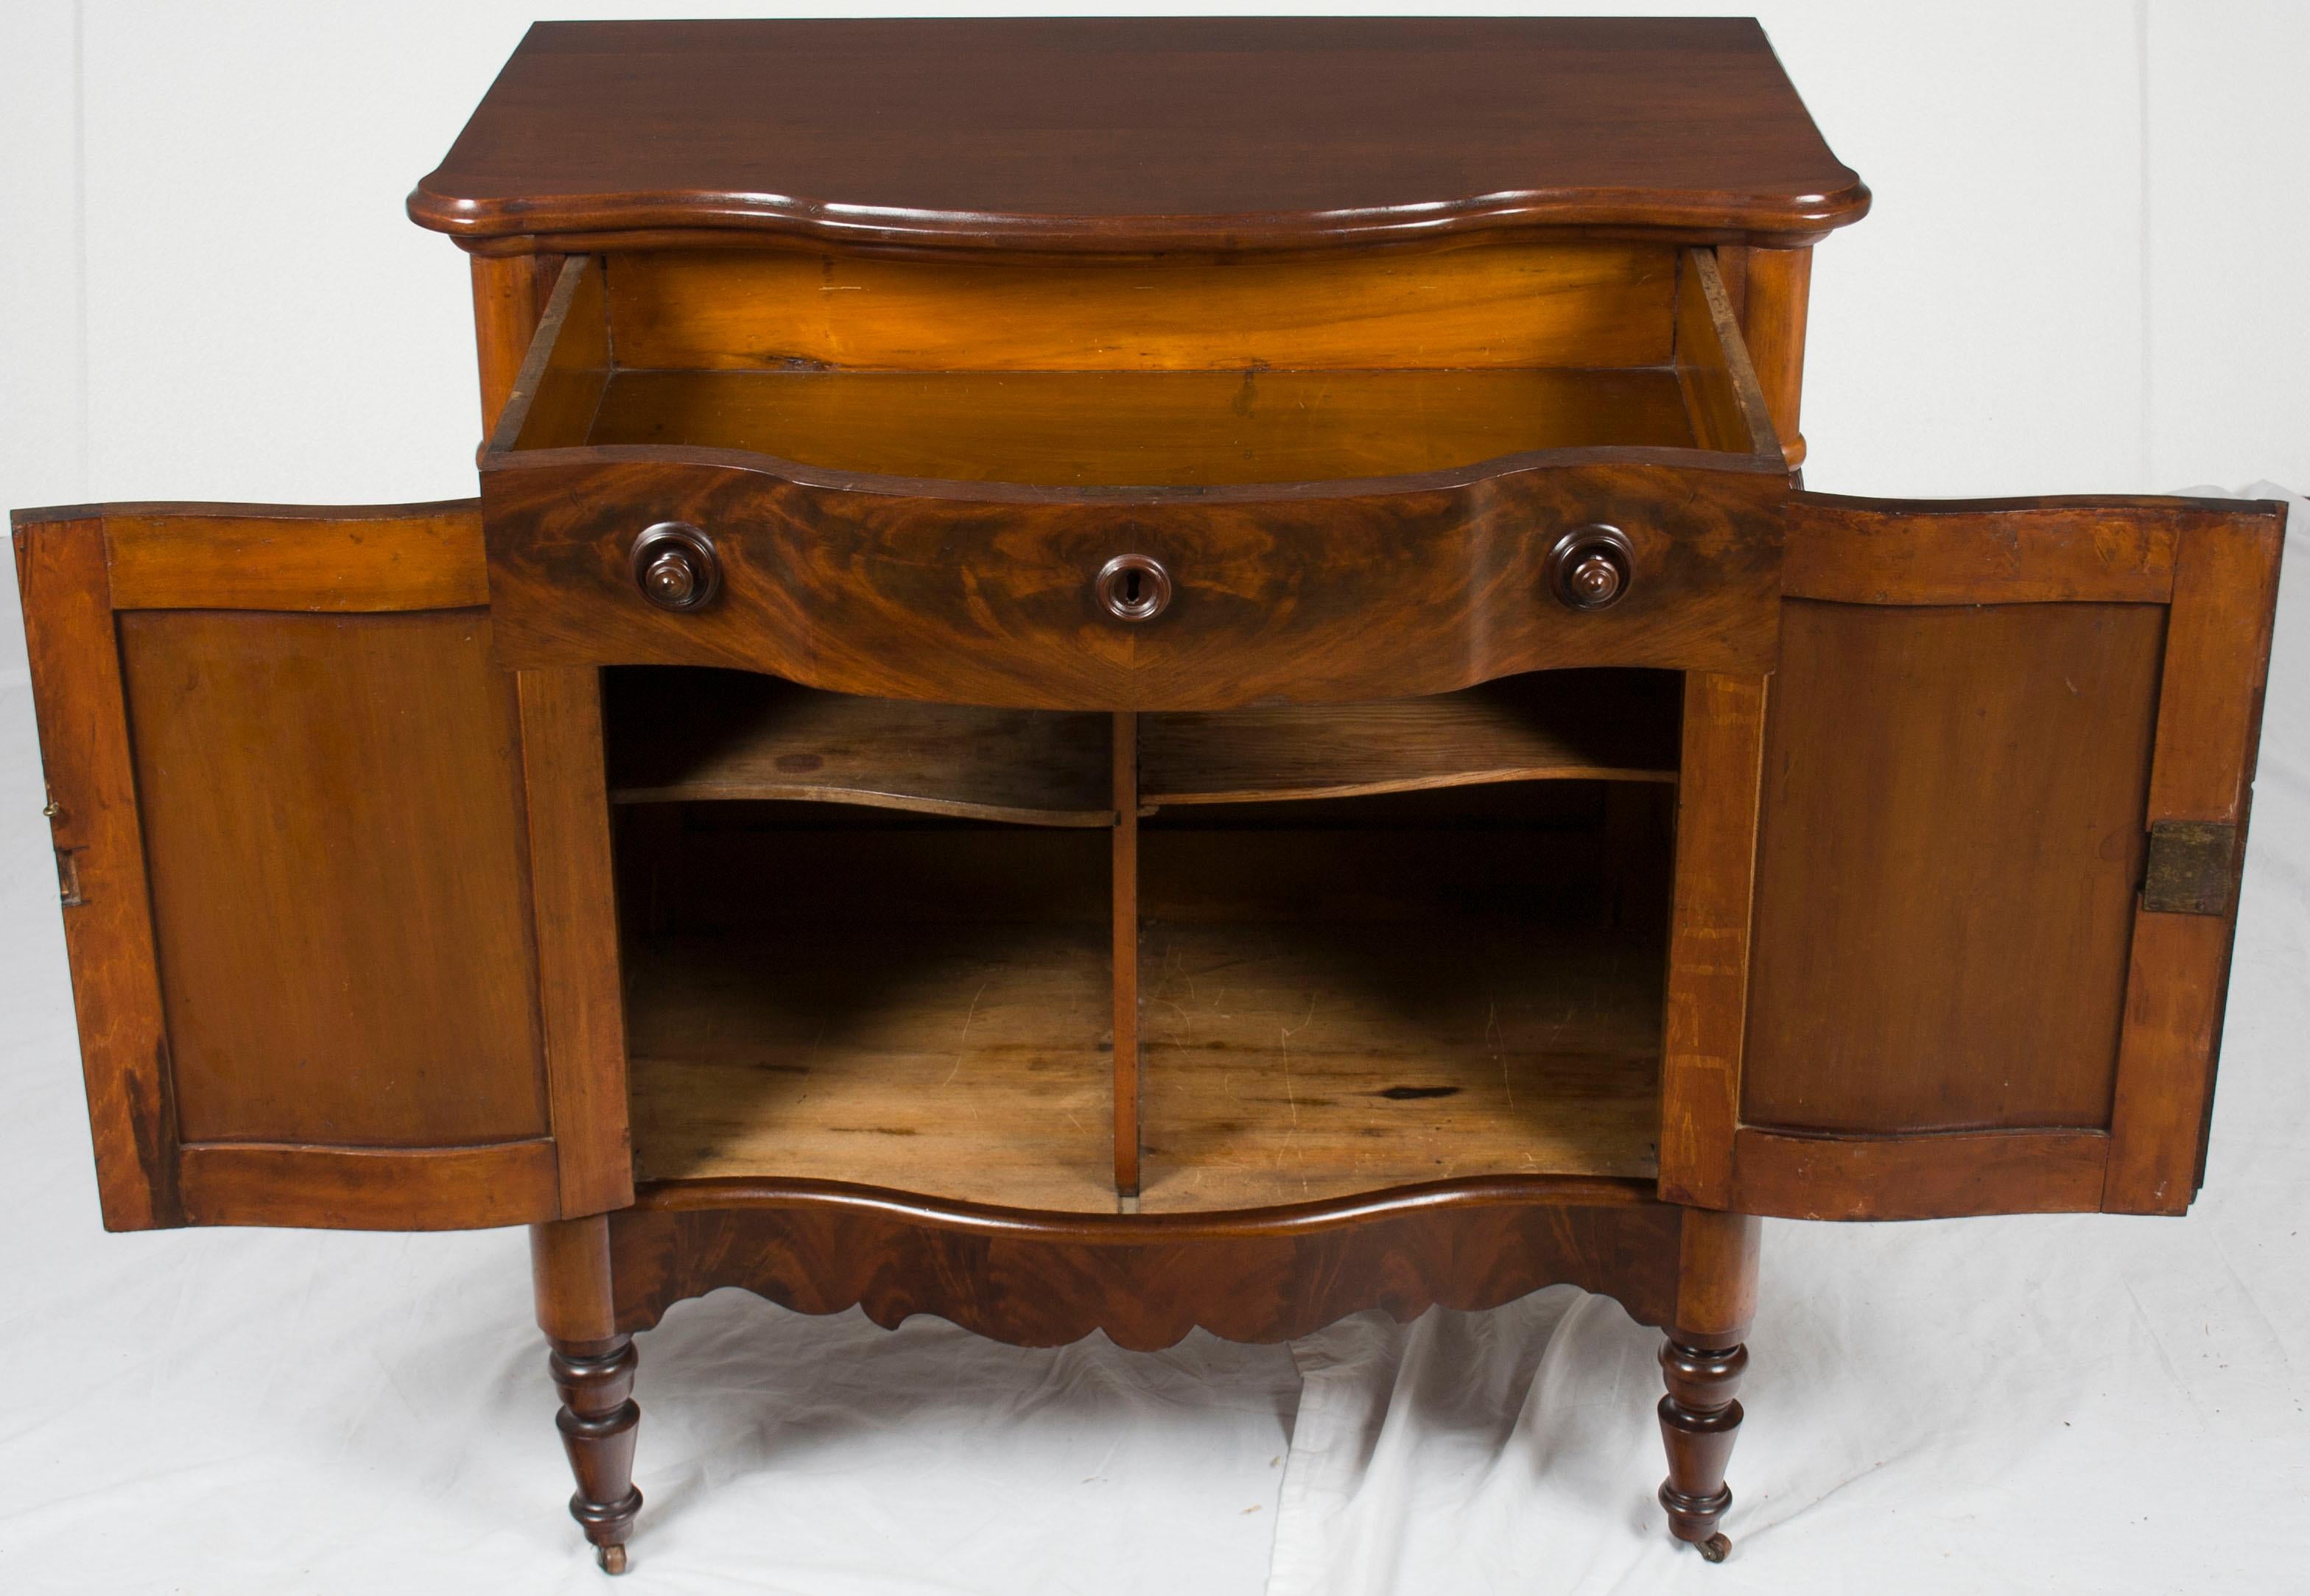 This is a Victorian period mahogany side cabinet from England. Perfect for miscellaneous storage in any room of the house. It would make a particularly small serving buffet in a dining room.

The origin of this cabinet is England and it was made